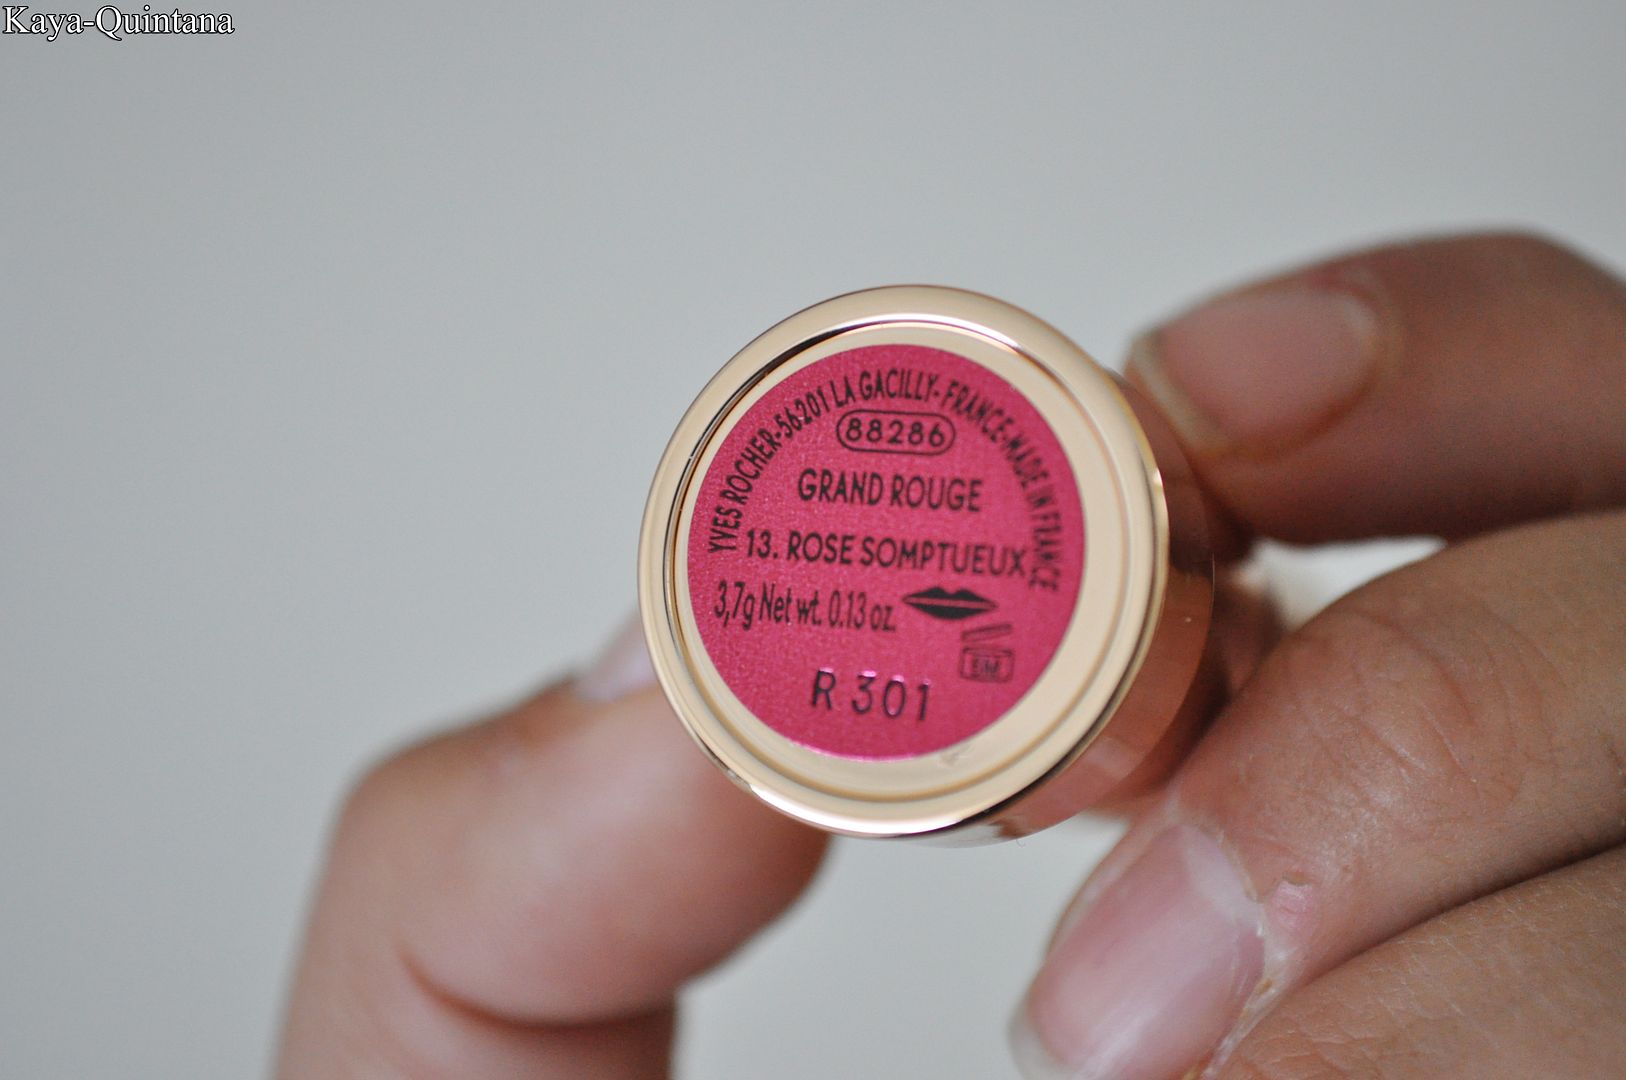 yves rocher grand rouge lipstick rose somptueux